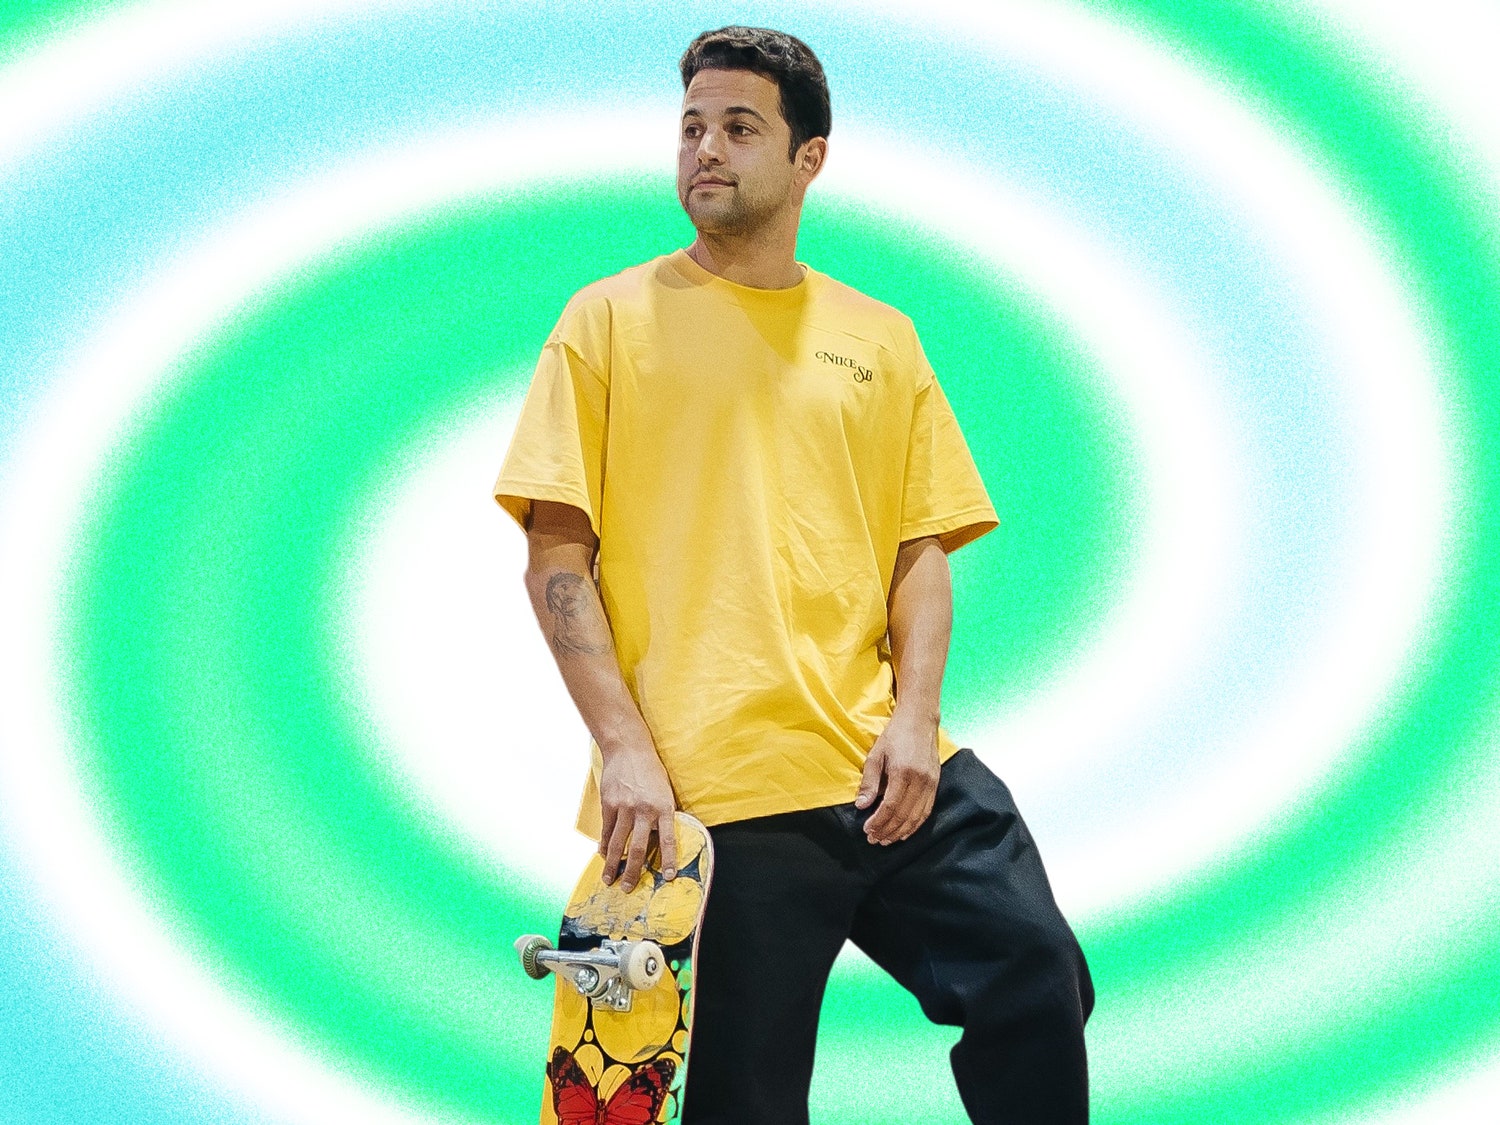 The Real-Life Diet of Pro Skateboarder Paul Rodriguez, Who Installed a Wellness Room In His Private Skatepark